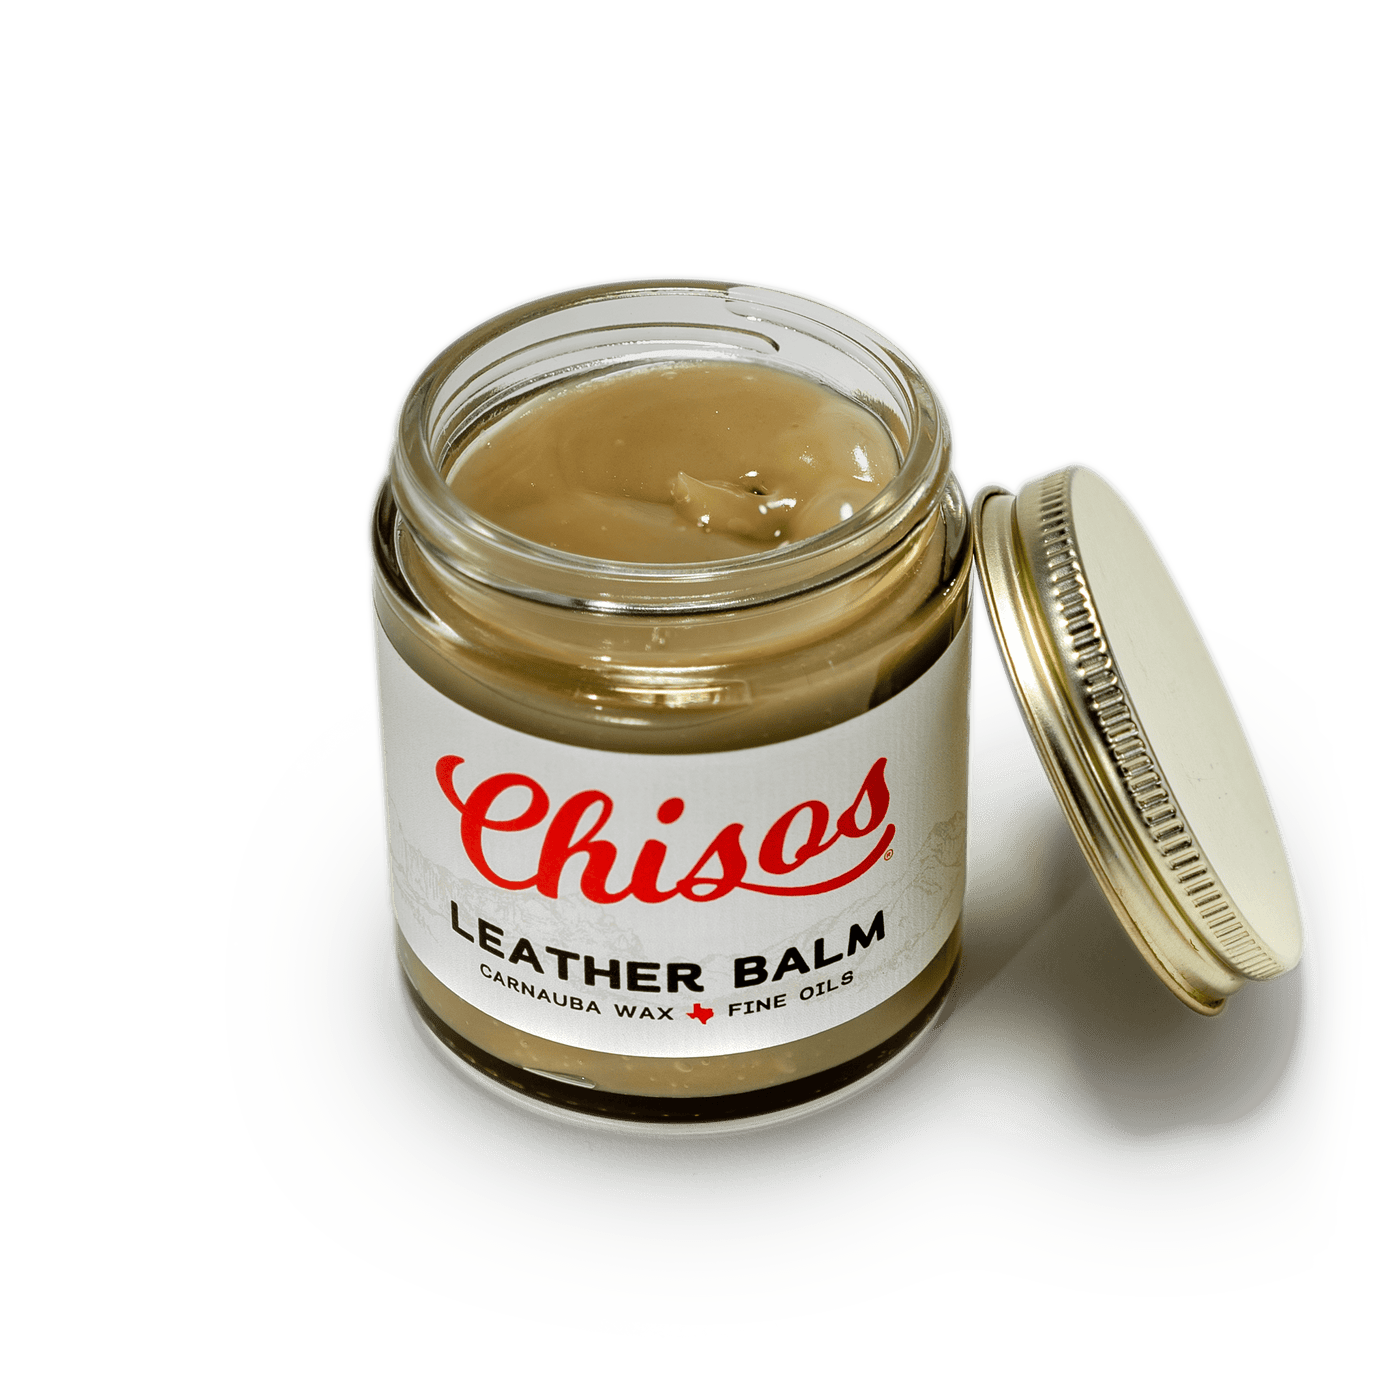 Chisos Leather Care Leather Balm